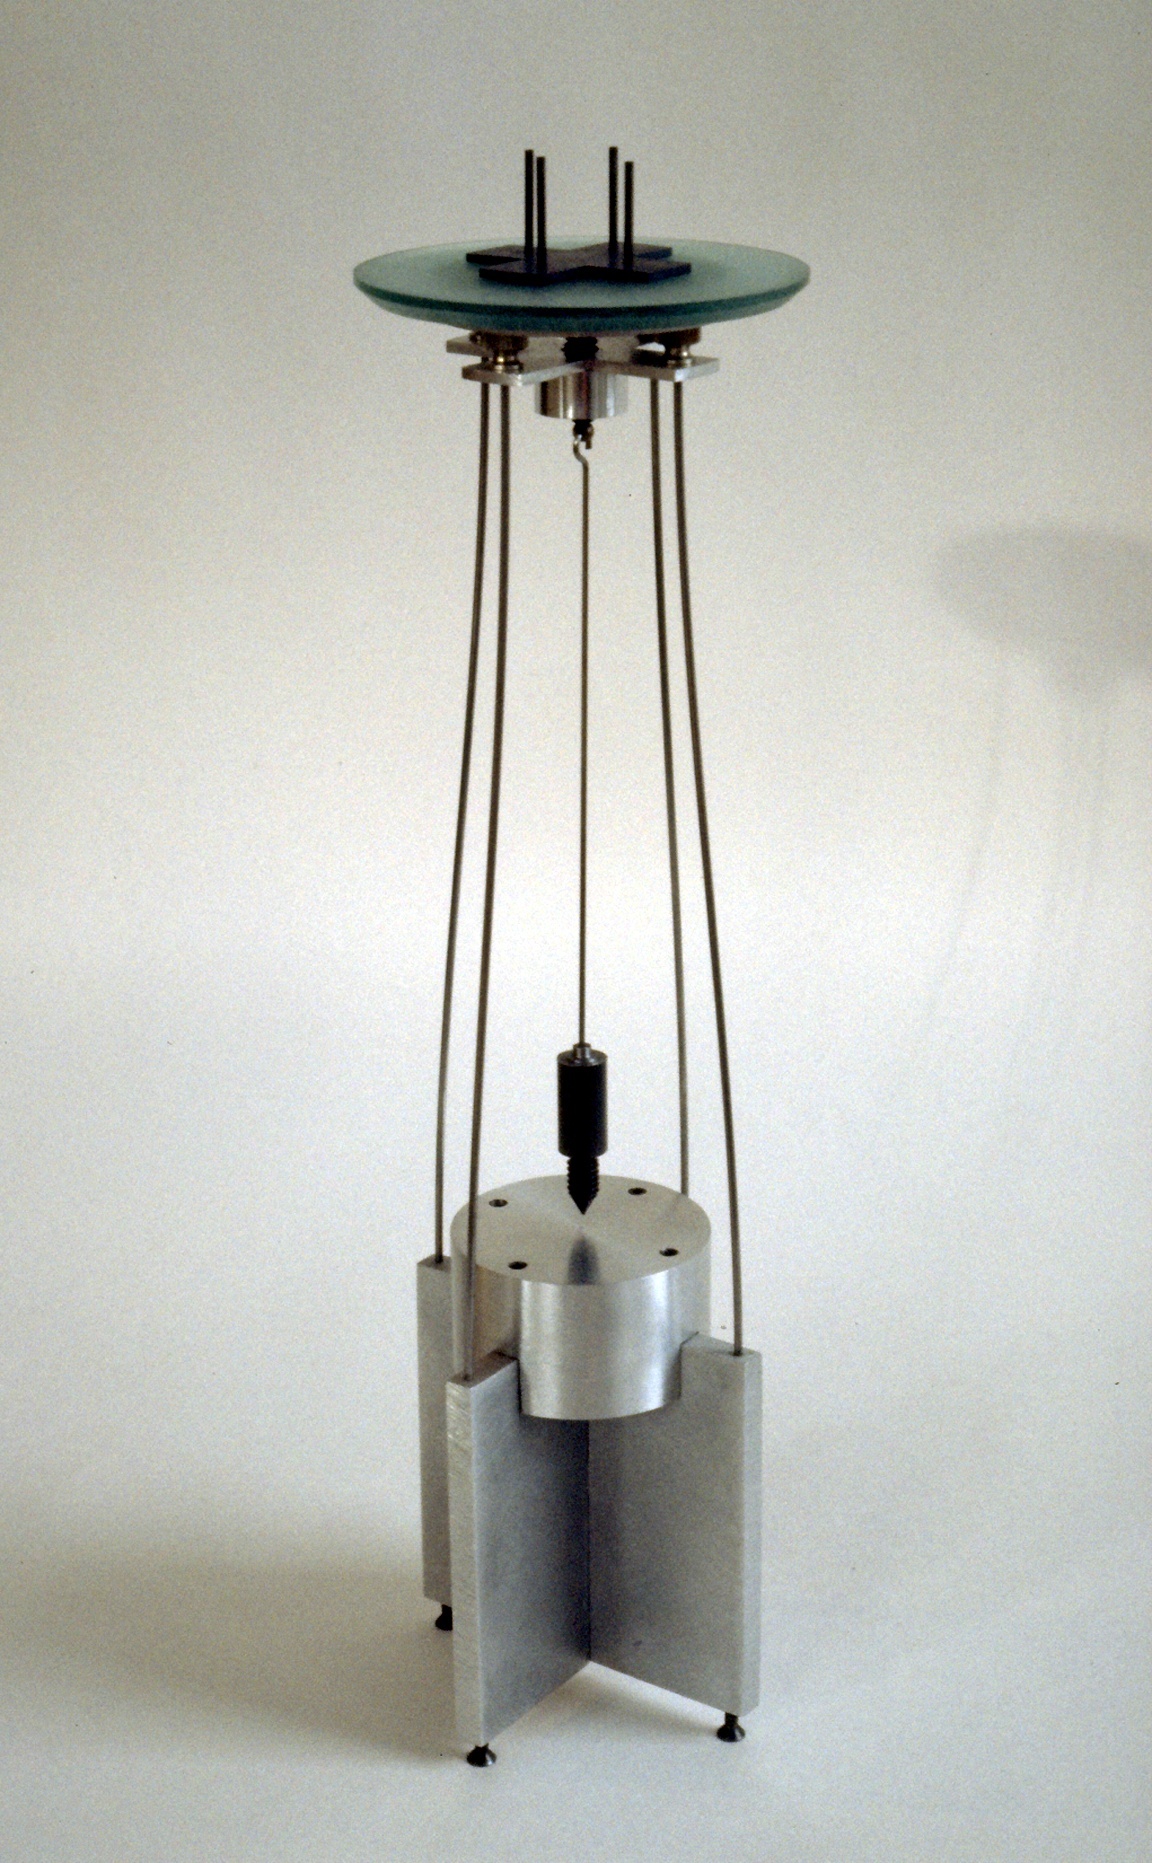 Small vertical sculpture with a weighted pendulum suspended from a glass disc over an aluminum base.